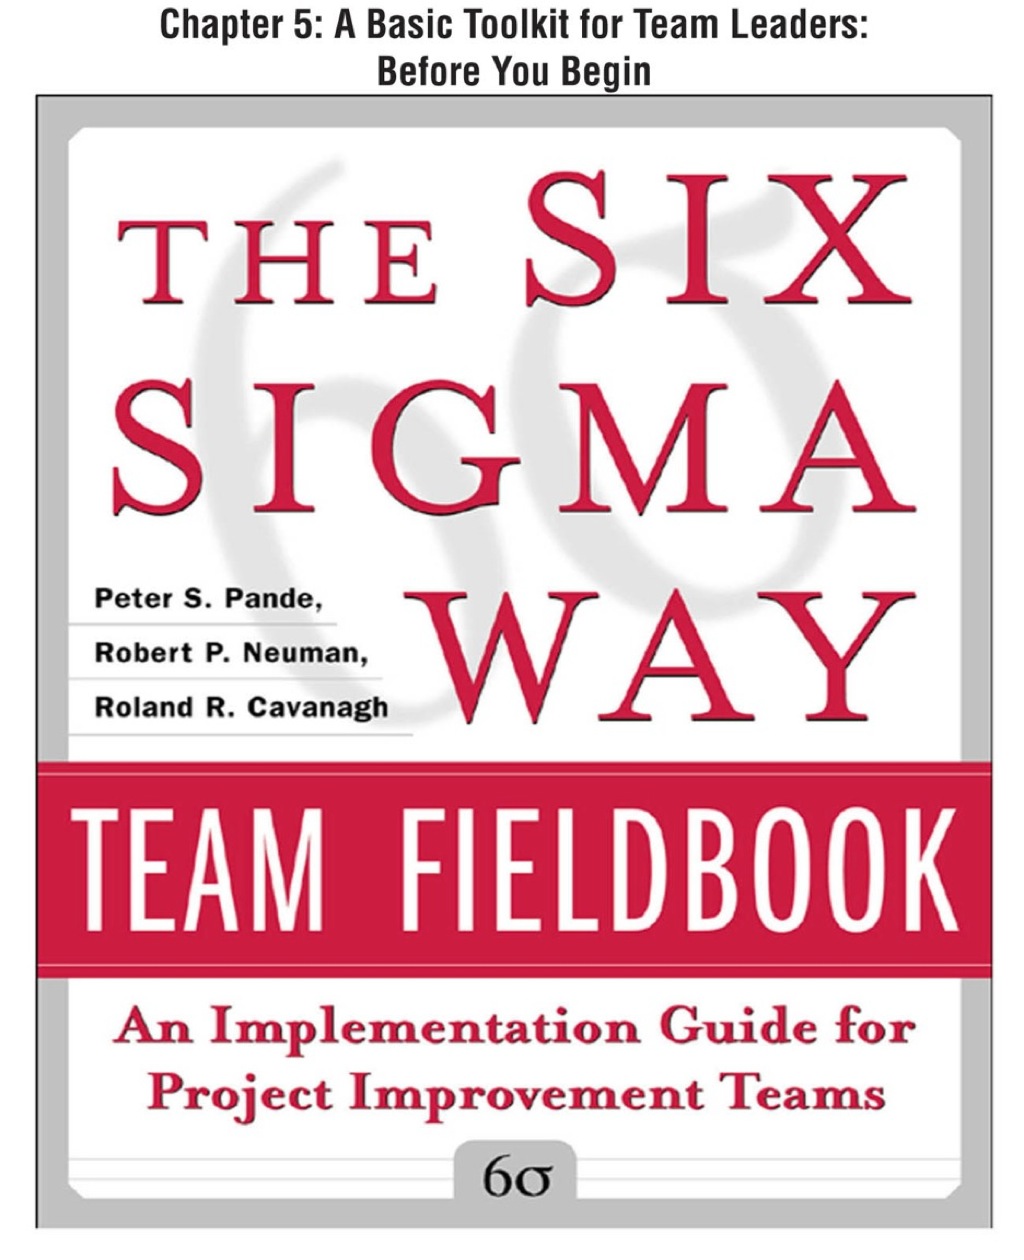 The Six Sigma Way Team Fieldbook  Chapter 5 - A Basic Toolkit for Team Leaders Before You Begin (eBook) - Peter Pande; Robert Neuman; Roland Cavanagh,